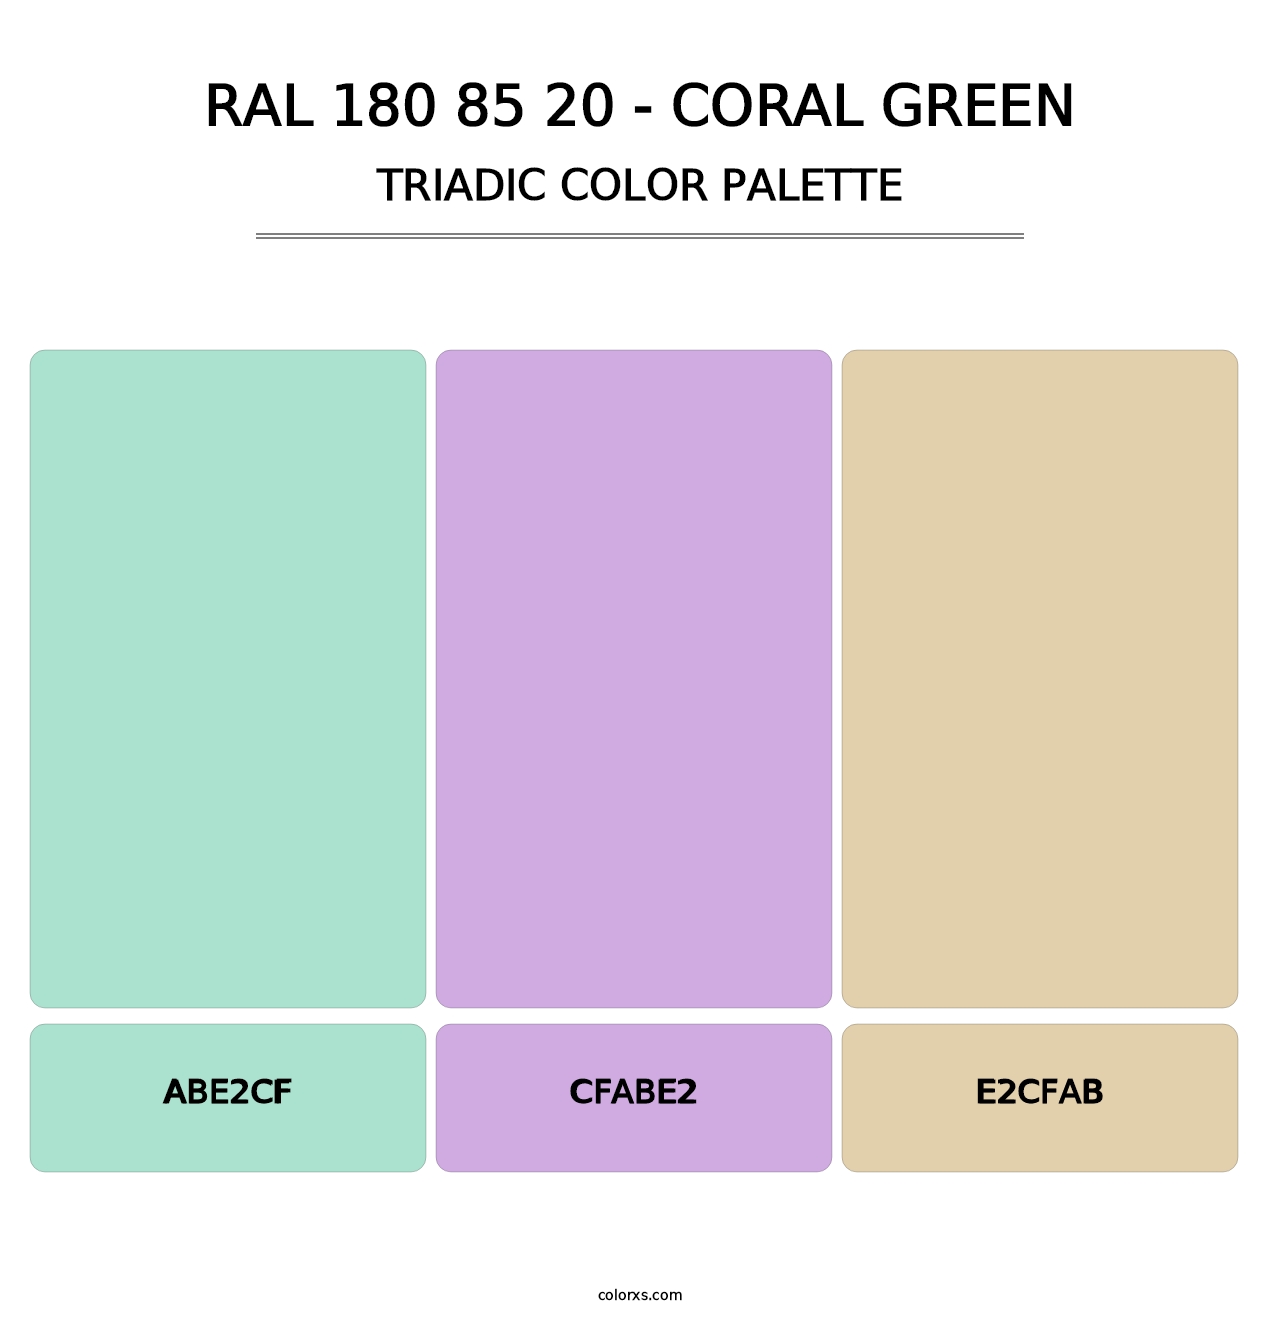 RAL 180 85 20 - Coral Green - Triadic Color Palette